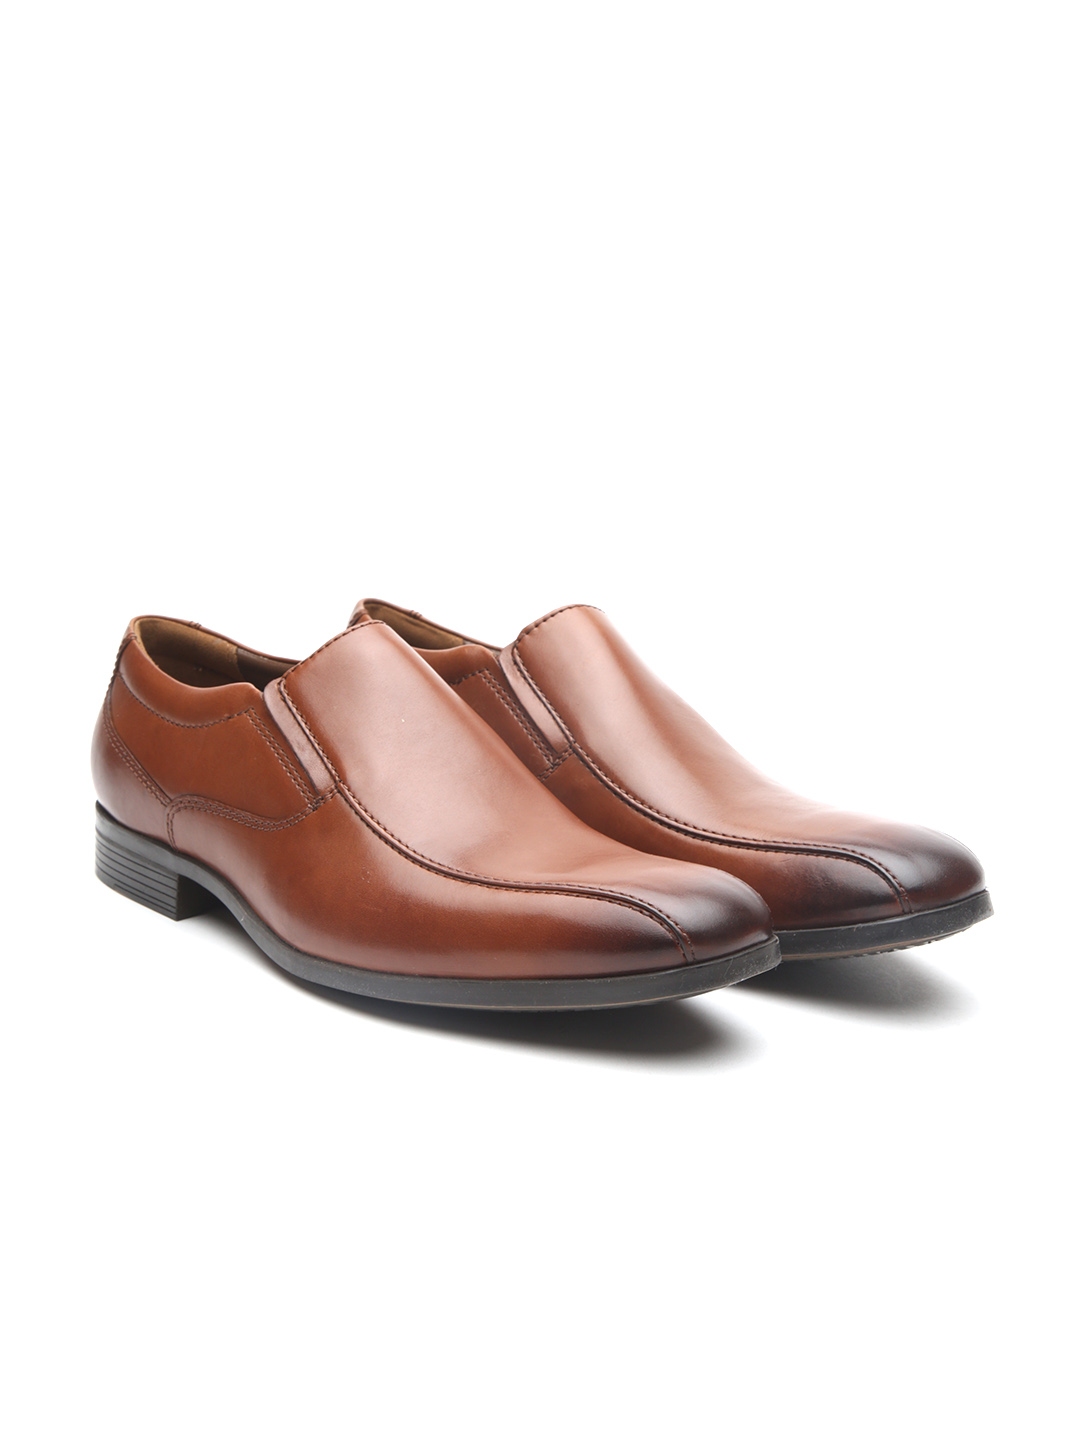 clarks conwell step